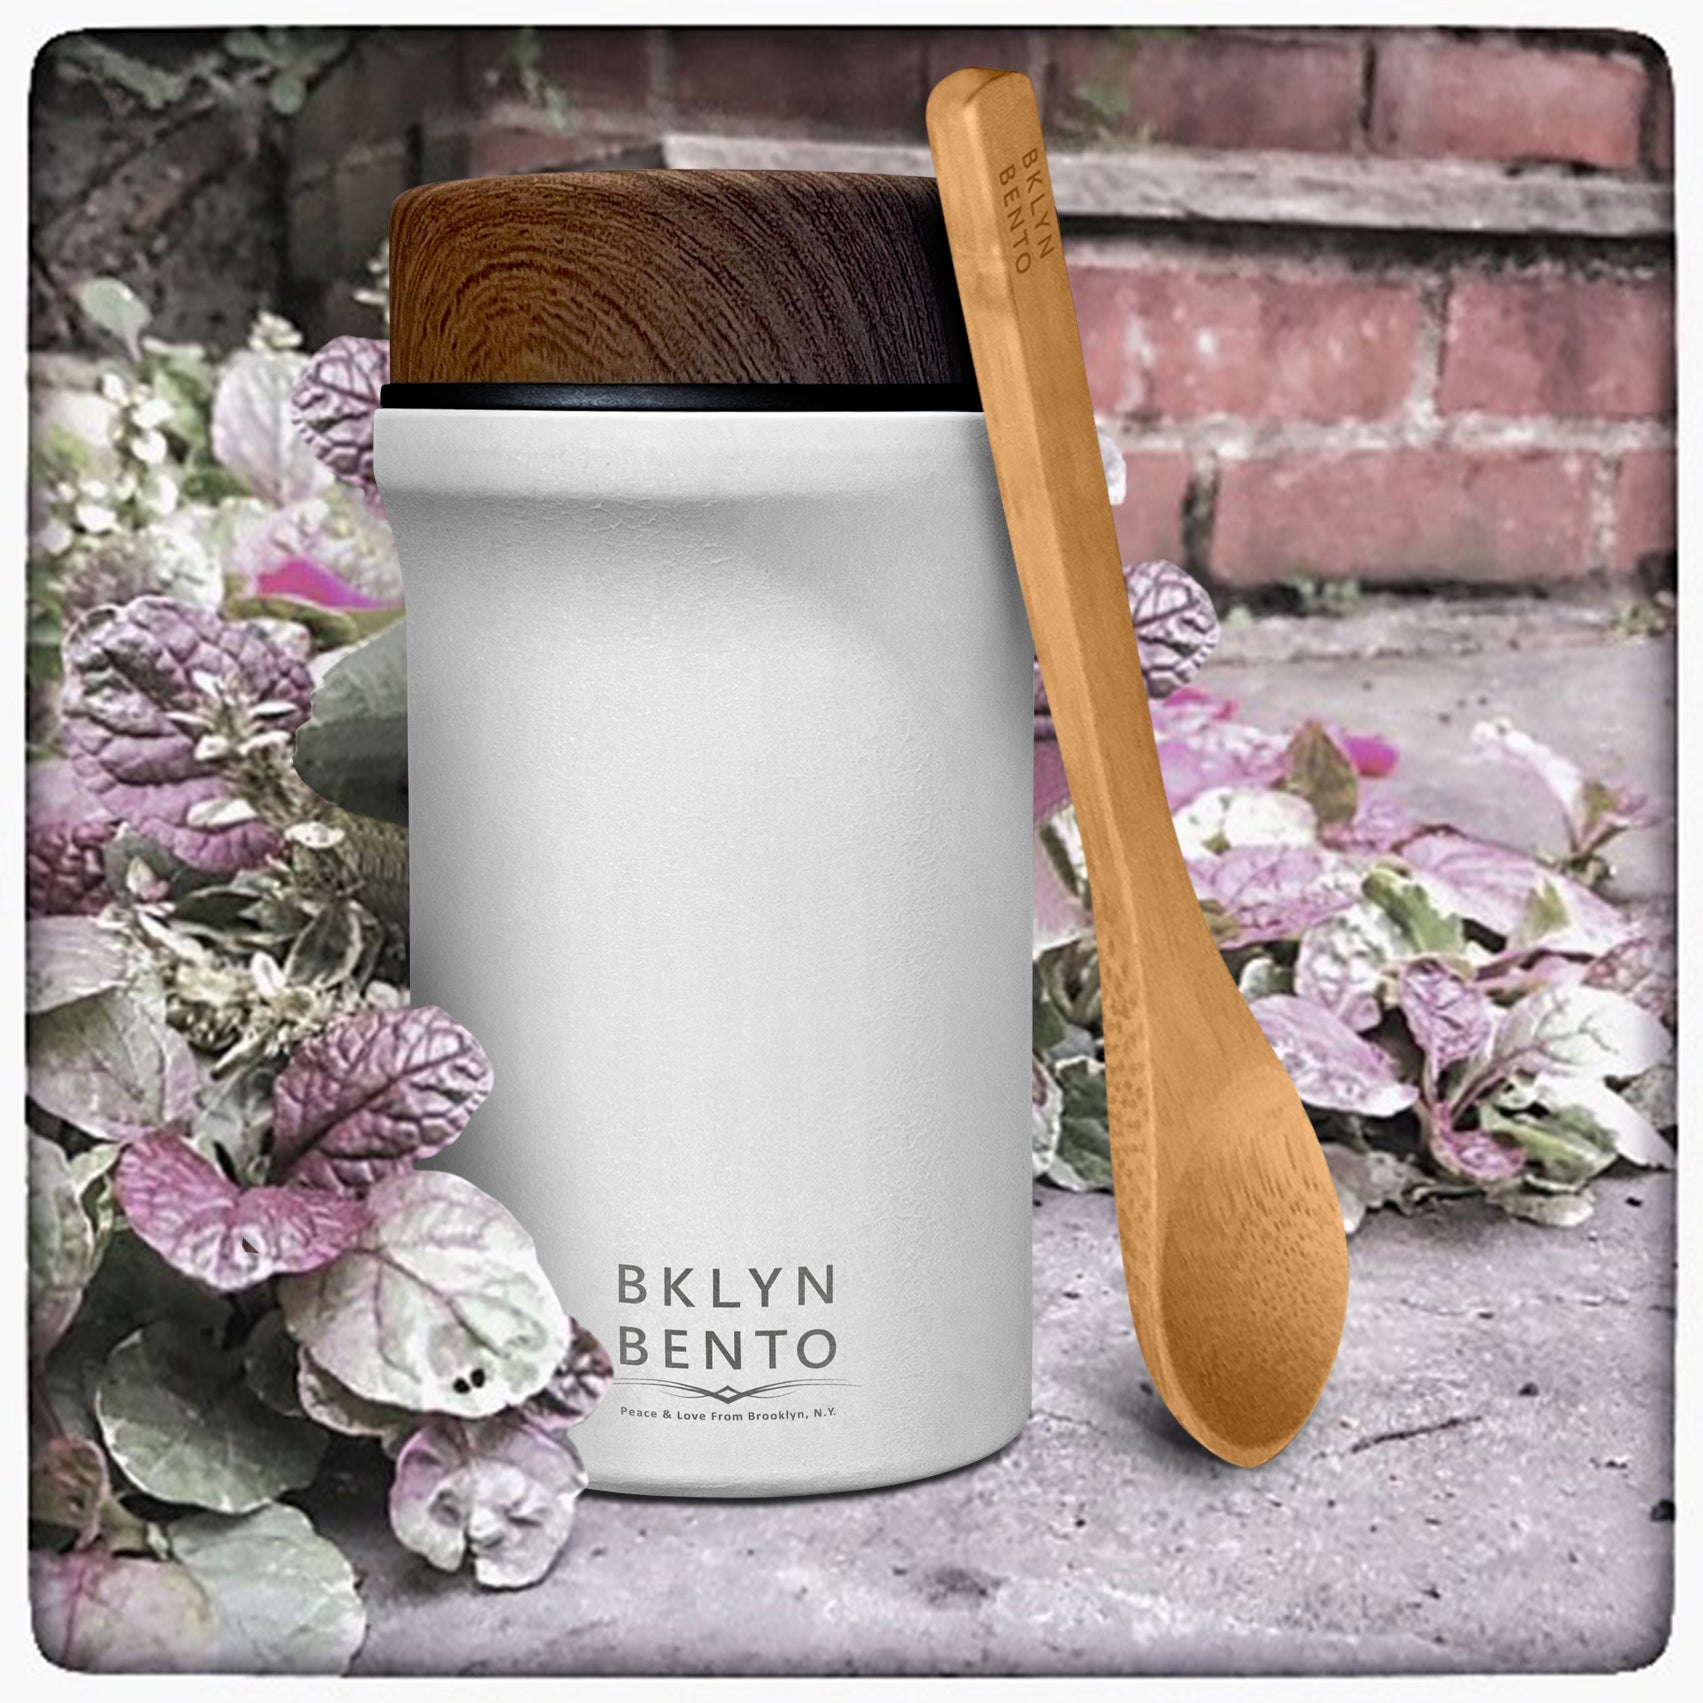 Bklyn Bento Stainless Steel Insulated Food Thermos with Bamboo Spoon,